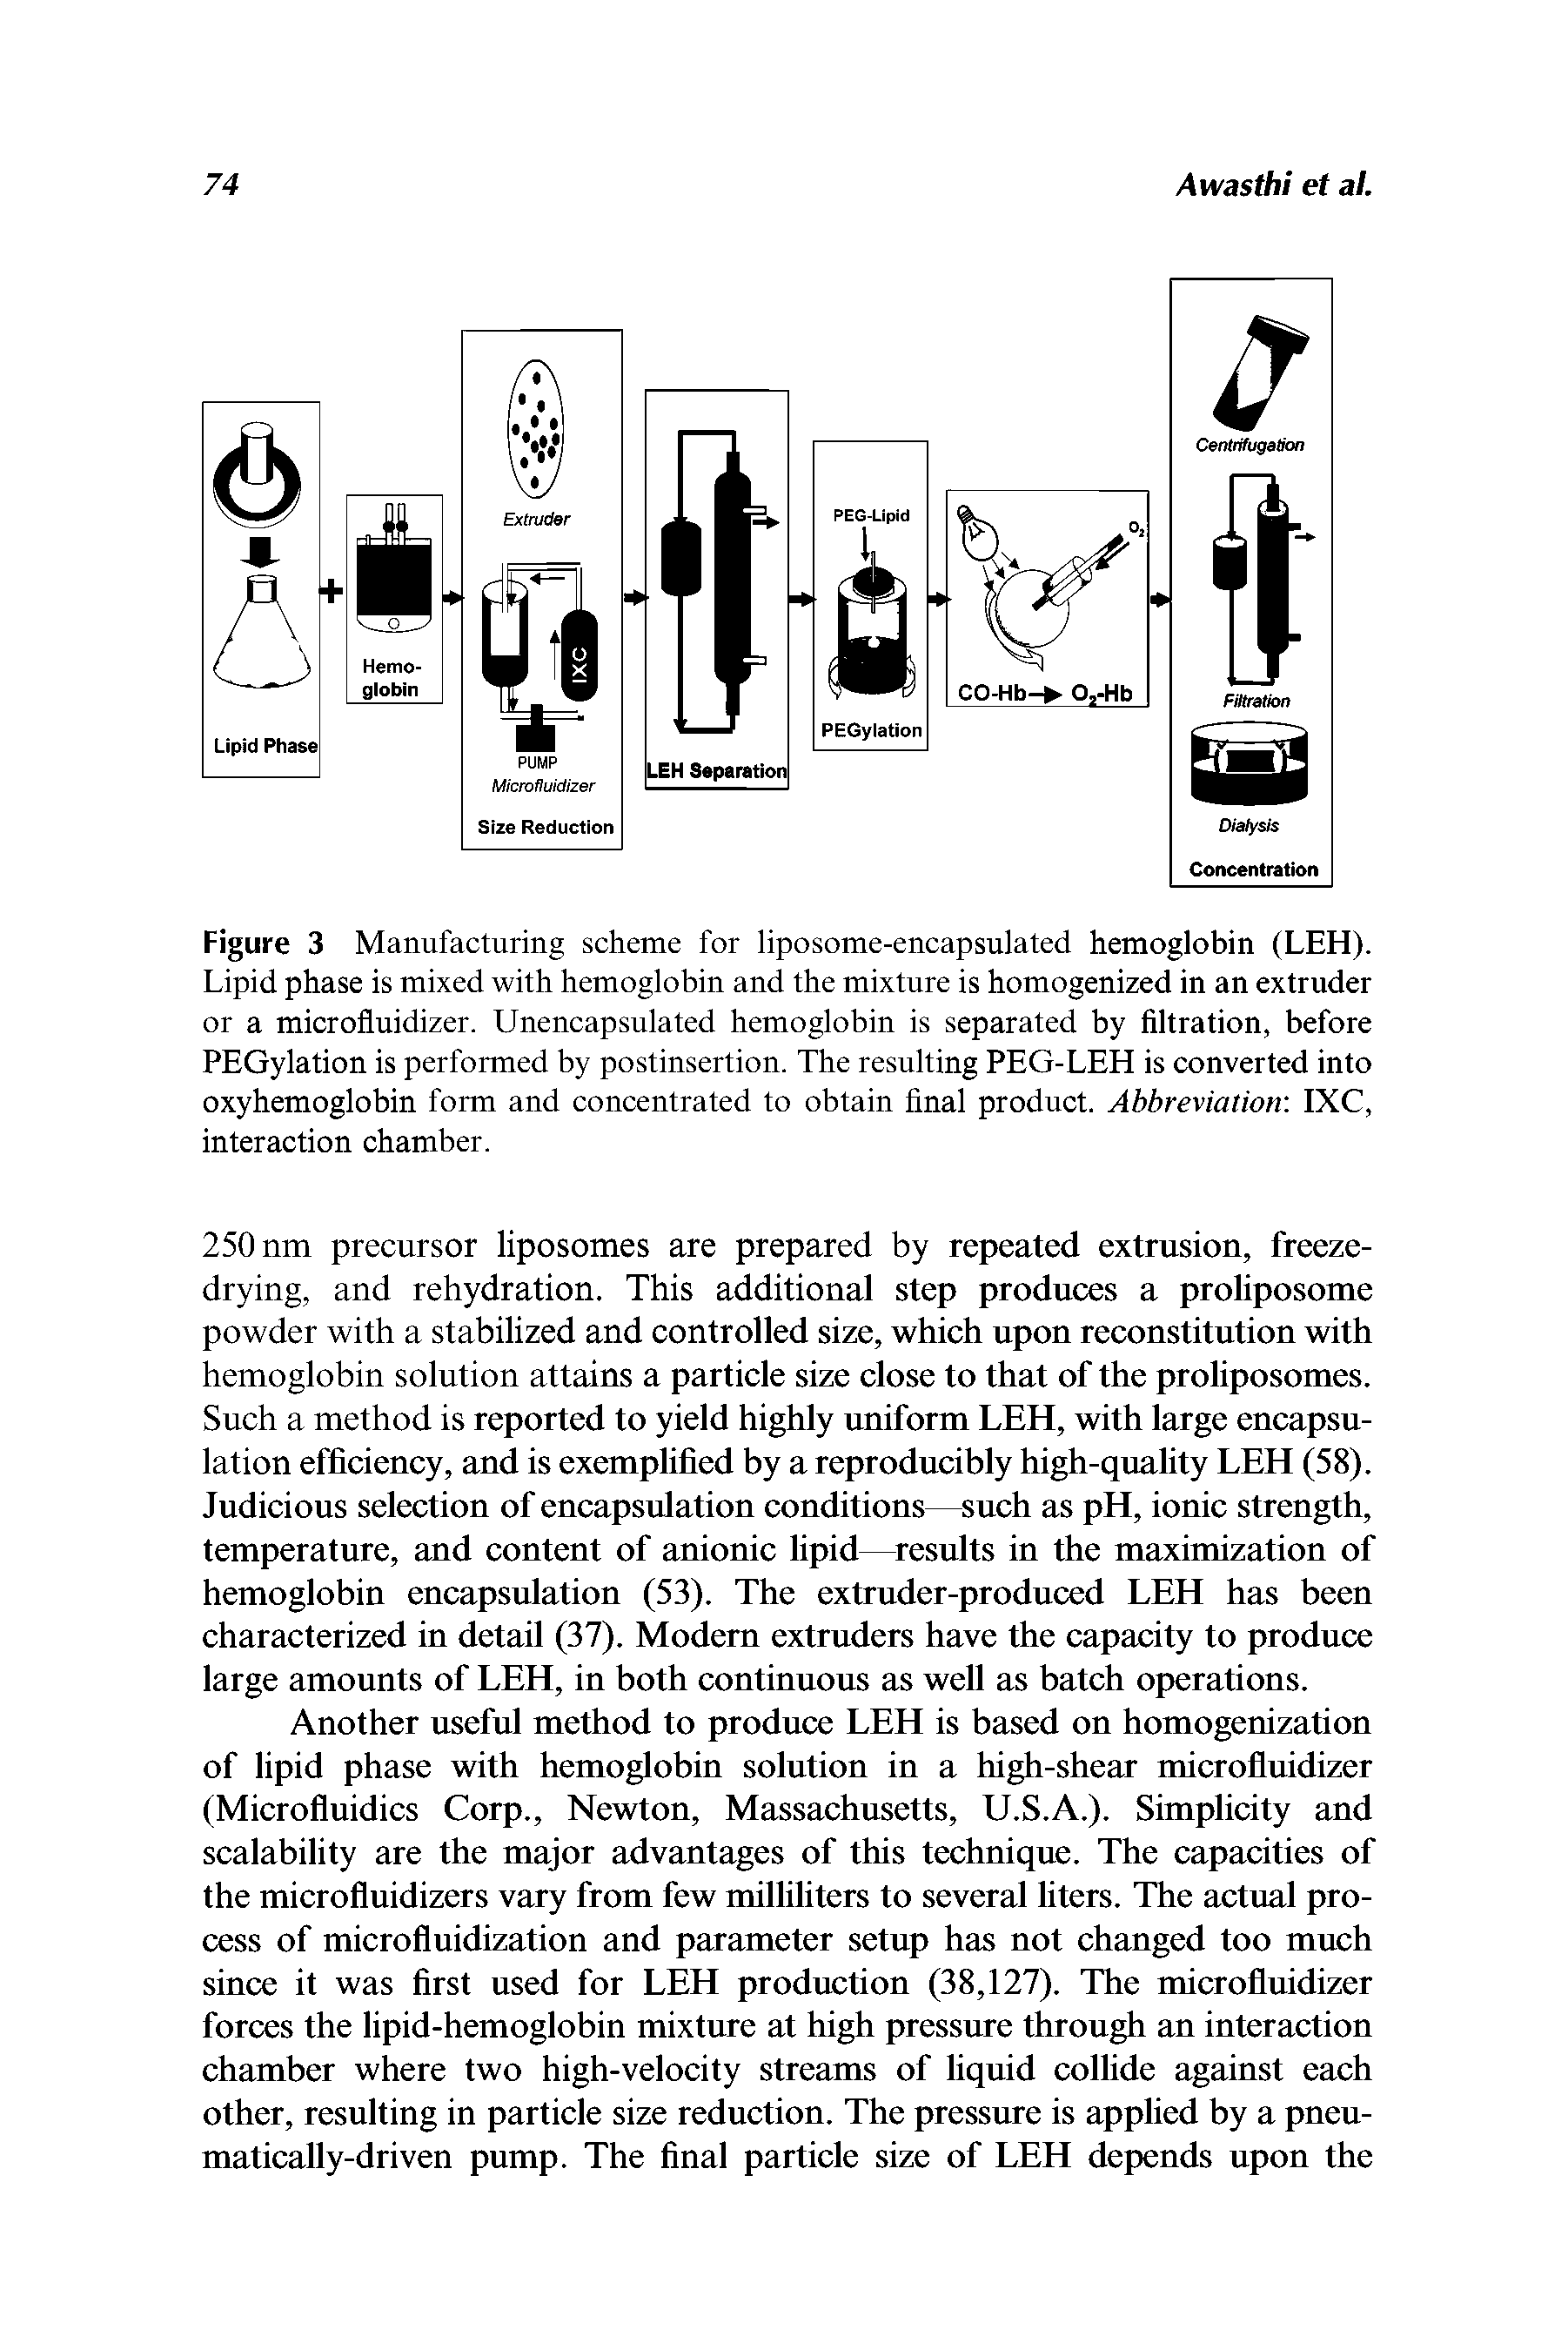 Figure 3 Manufacturing scheme for liposome-encapsulated hemoglobin (LEH). Lipid phase is mixed with hemoglobin and the mixture is homogenized in an extruder or a microfluidizer. Unencapsulated hemoglobin is separated by filtration, before PEGylation is performed by postinsertion. The resulting PEG-LEH is converted into oxyhemoglobin form and concentrated to obtain final product. Abbreviation IXC, interaction chamber.